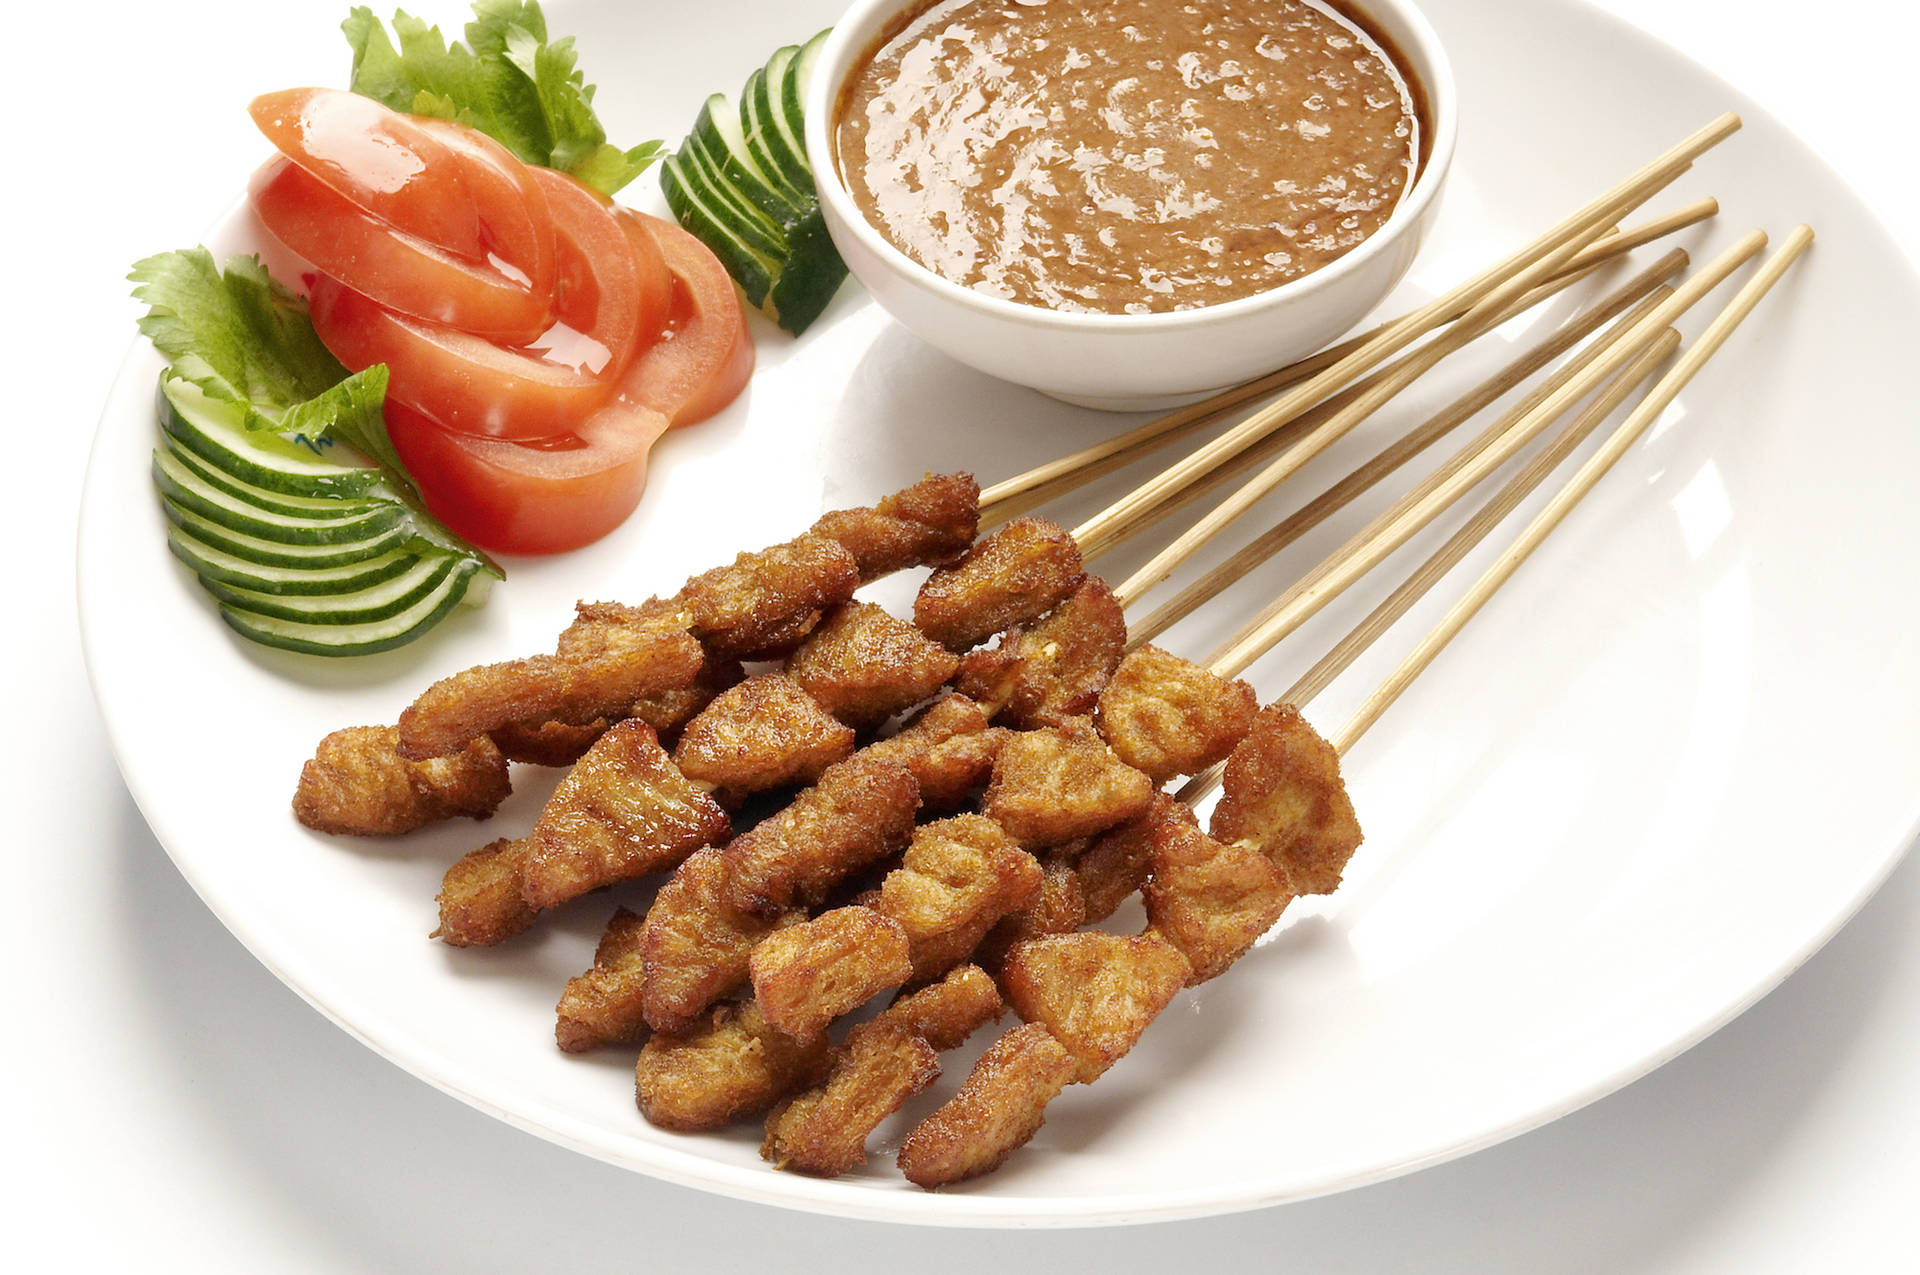 Savory Chicken Satay on a Tranquil White Plate Wallpaper